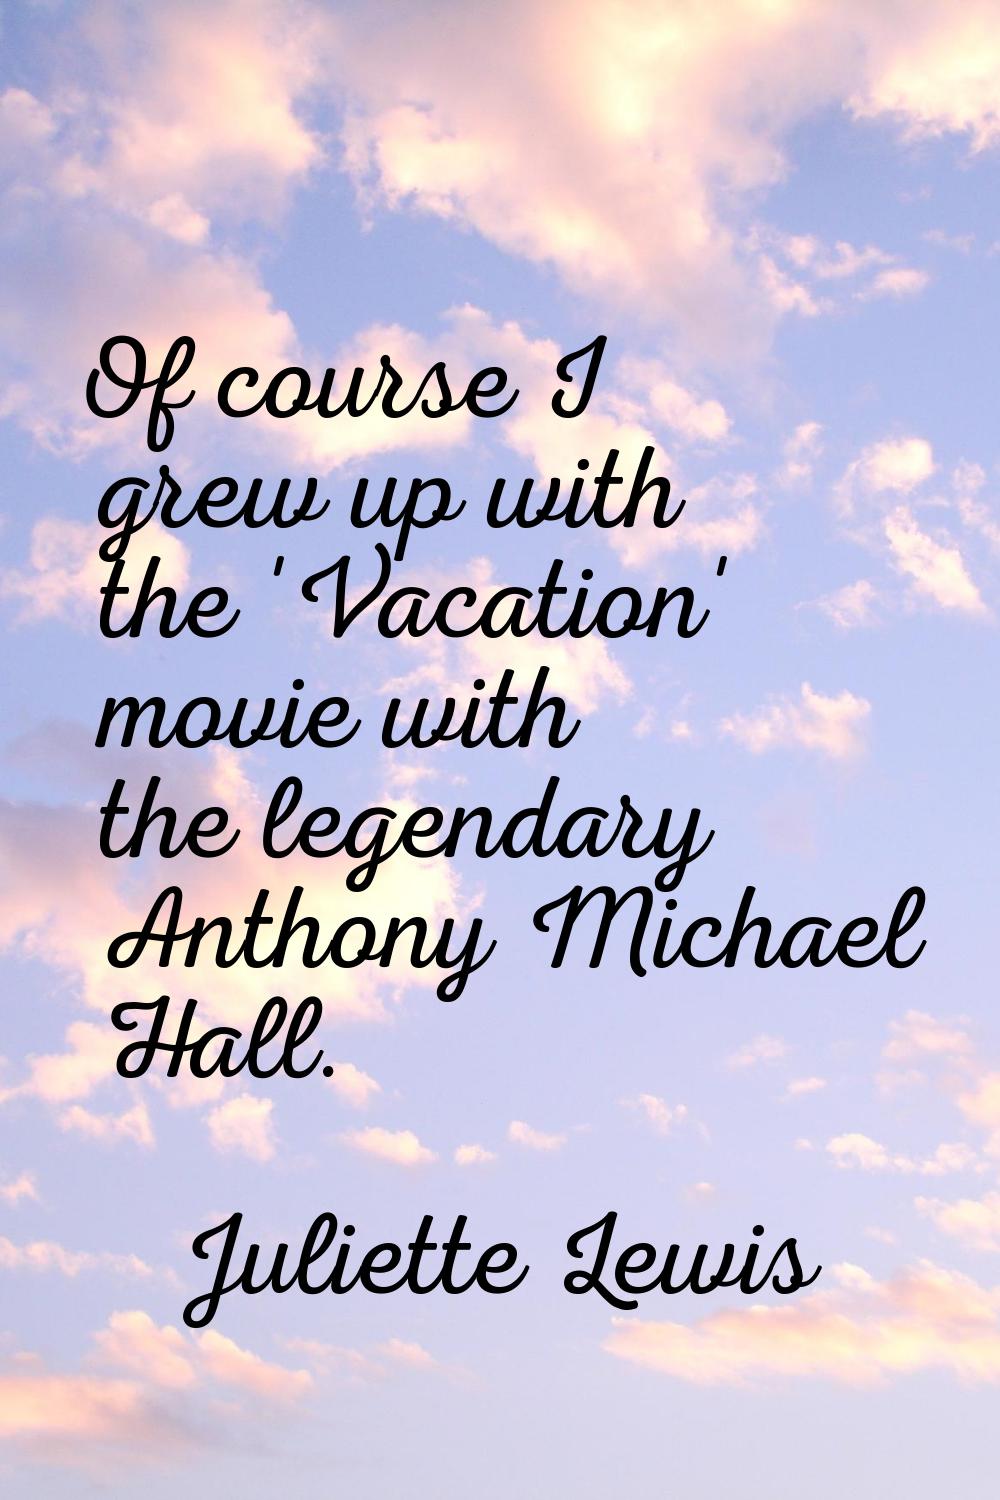 Of course I grew up with the 'Vacation' movie with the legendary Anthony Michael Hall.